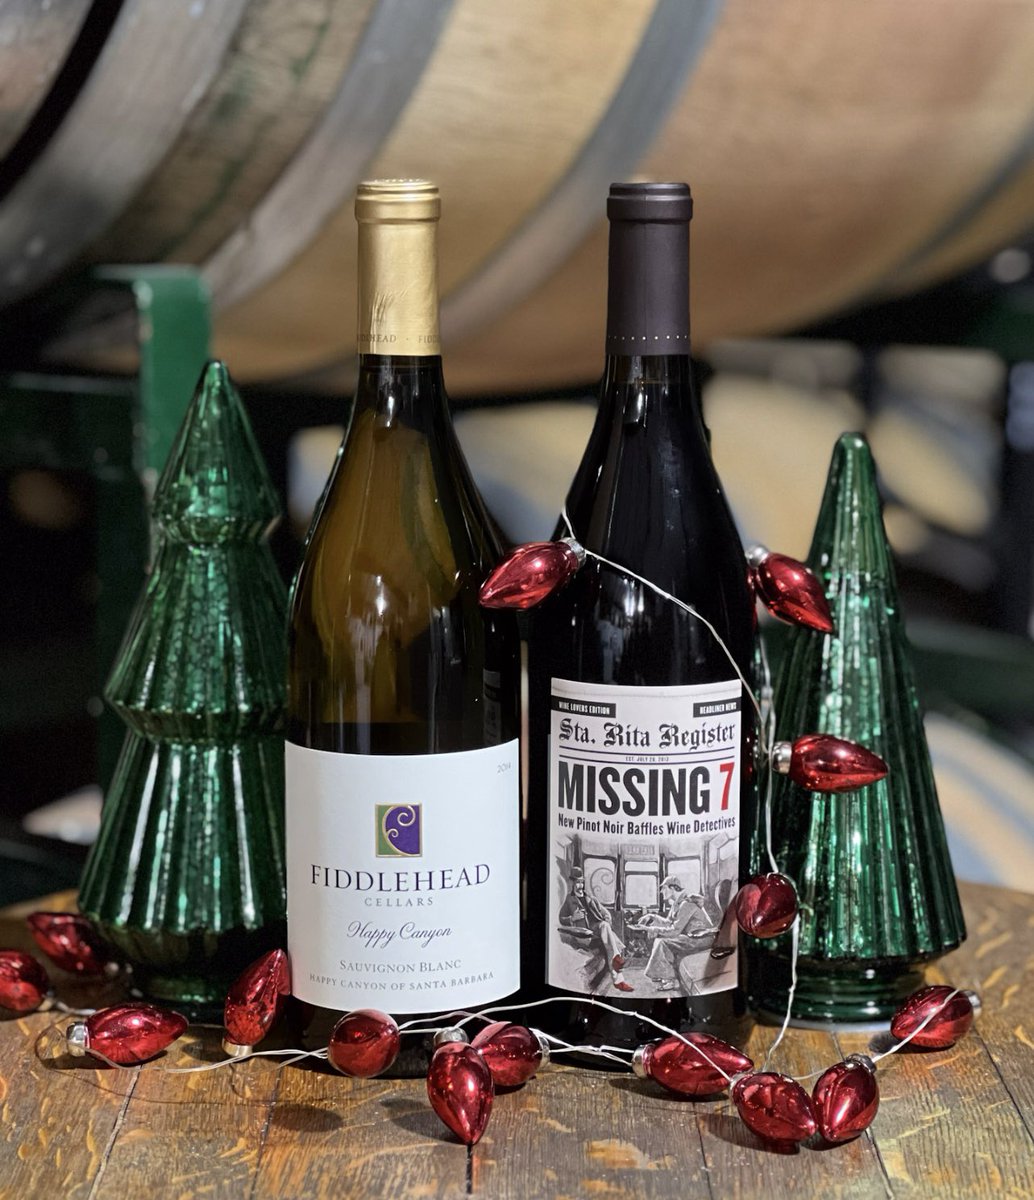 I'm Dreaming of a White Christmas, BUT if the White runs out I'll drink the Red. 🍷 

#fiddleheadwine #fiddleheadcellars #wine #winetime #wineweekend #winehumor #winery #localwinery #californiawinery #winelover #pinotnoir #sauvignonblanc #holidaywine #12daysoffiddlehead